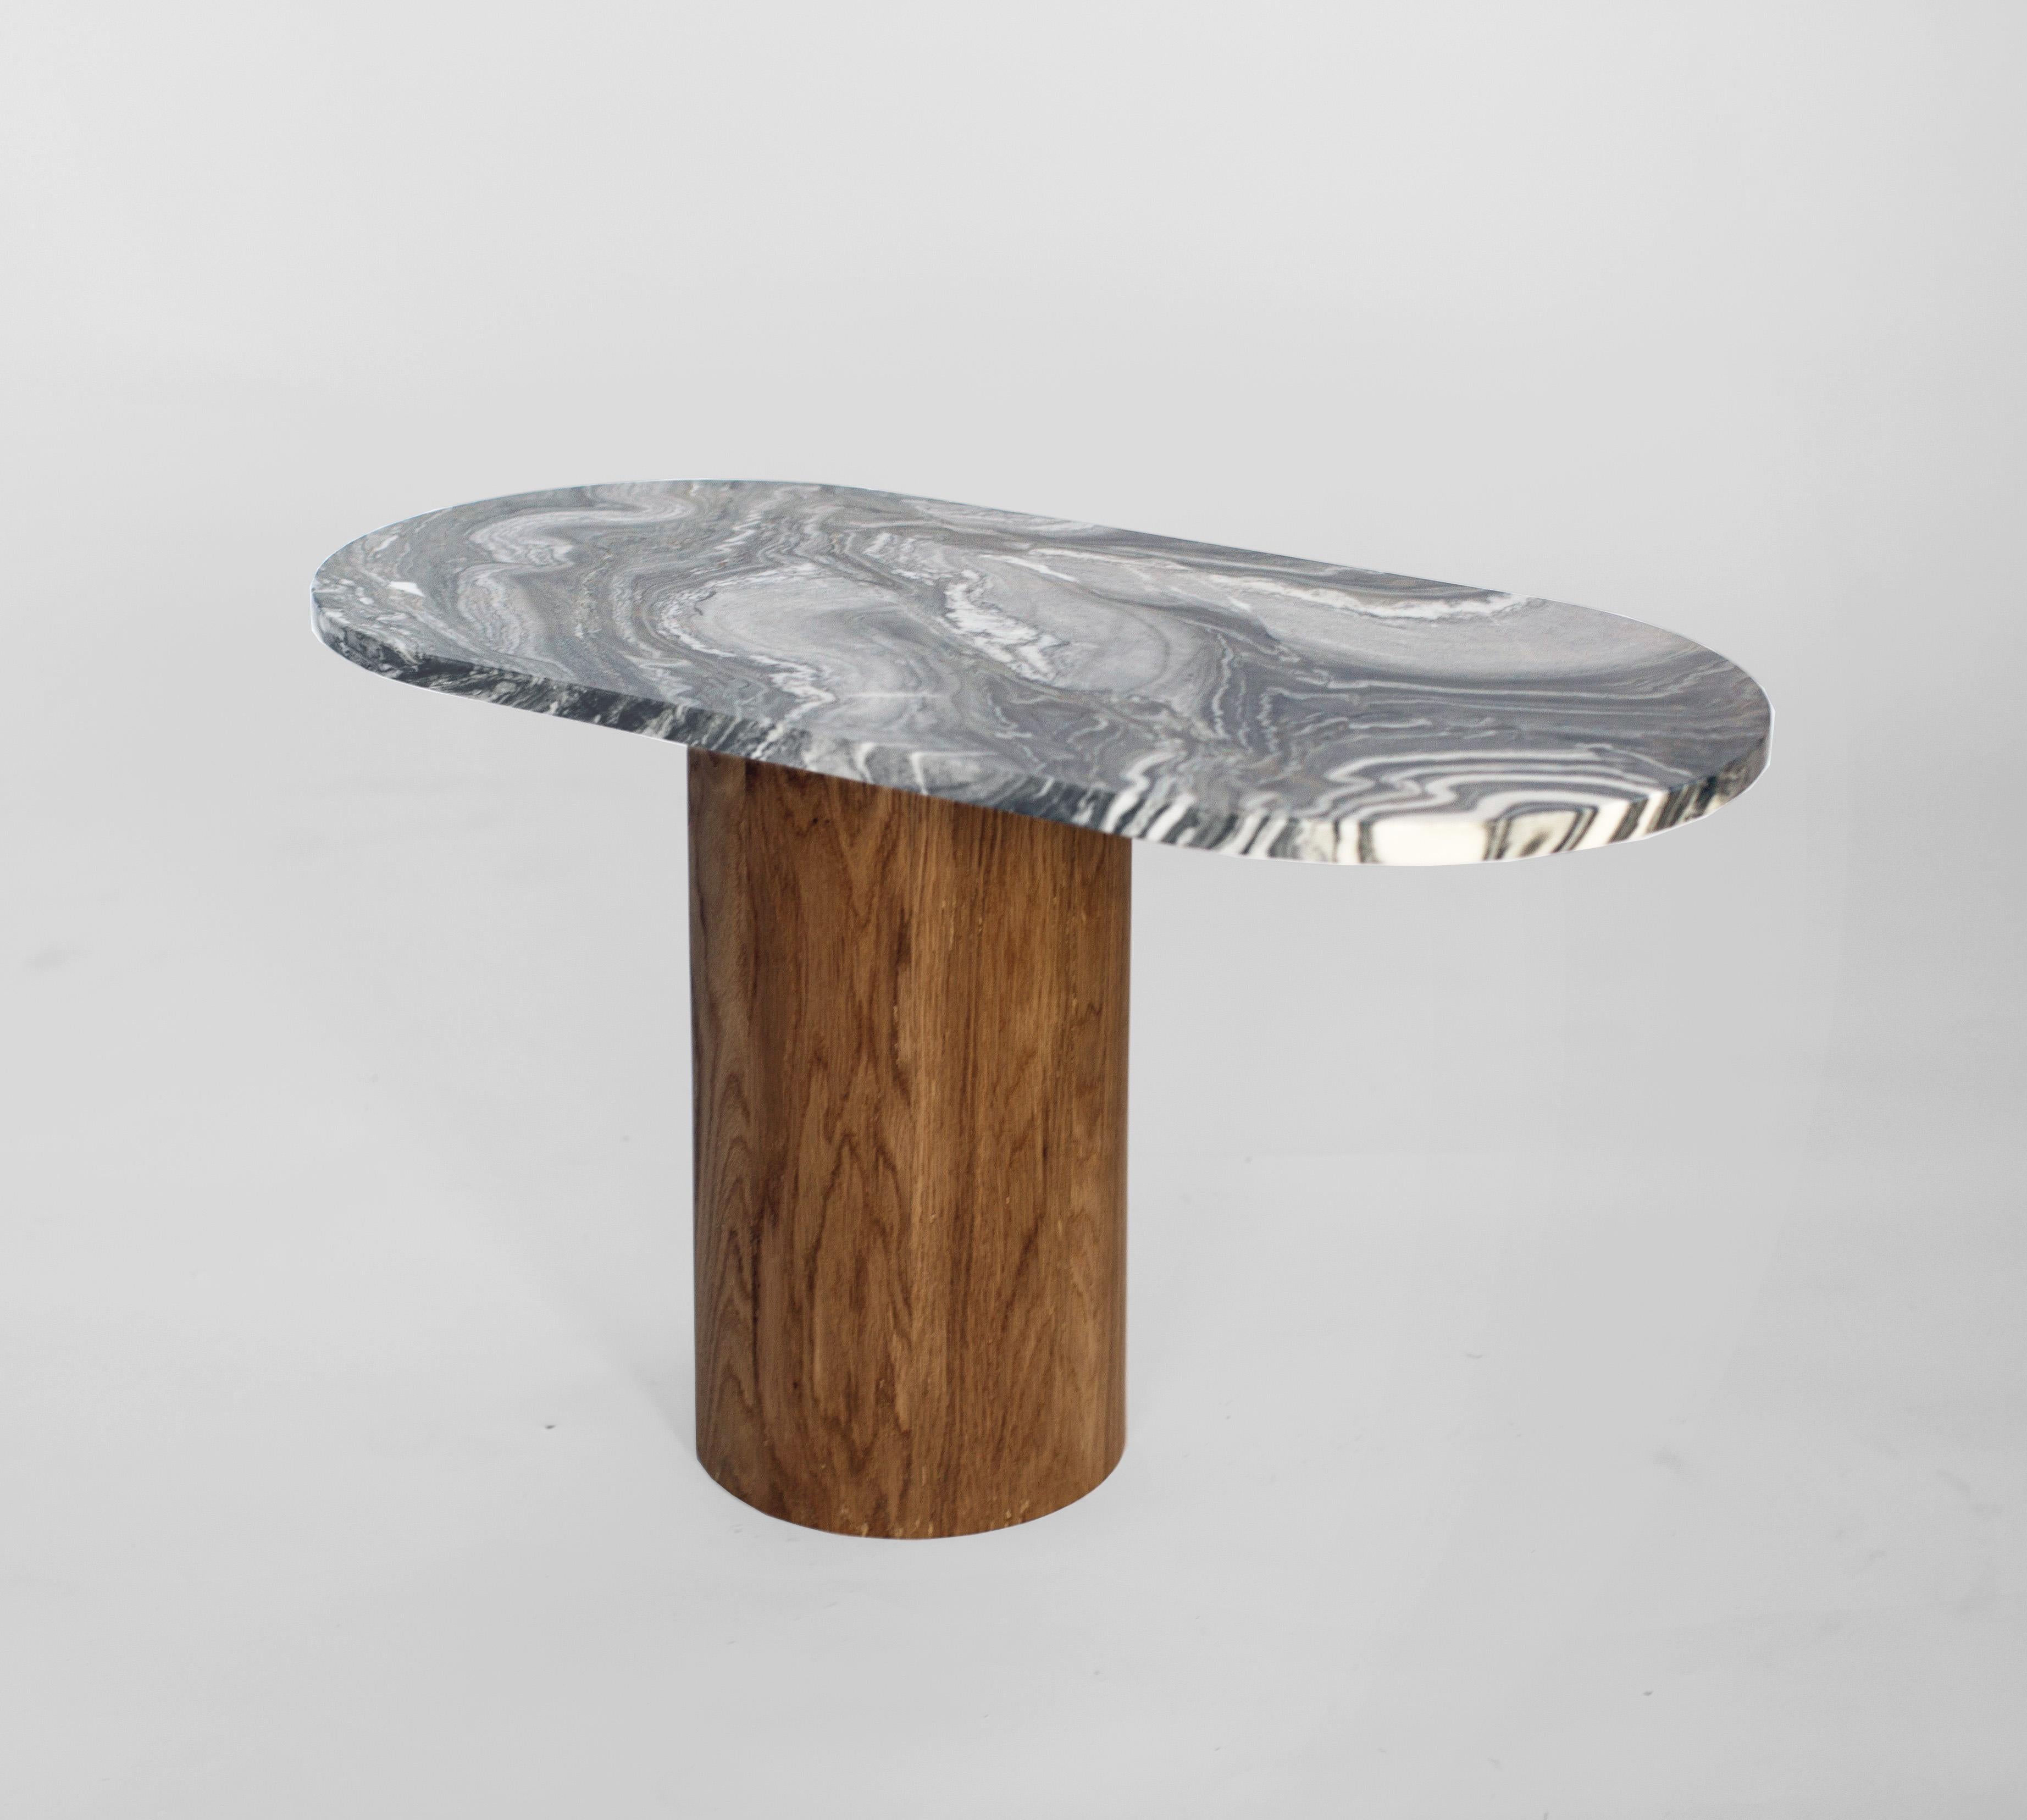 This coffee or side table comes in a rich and dark cut of marble with milky veining. The marble top has a base offset from its center which is crafted in hand-lathed solid white oak with an oiled finish. The table is part of of a capsule collection